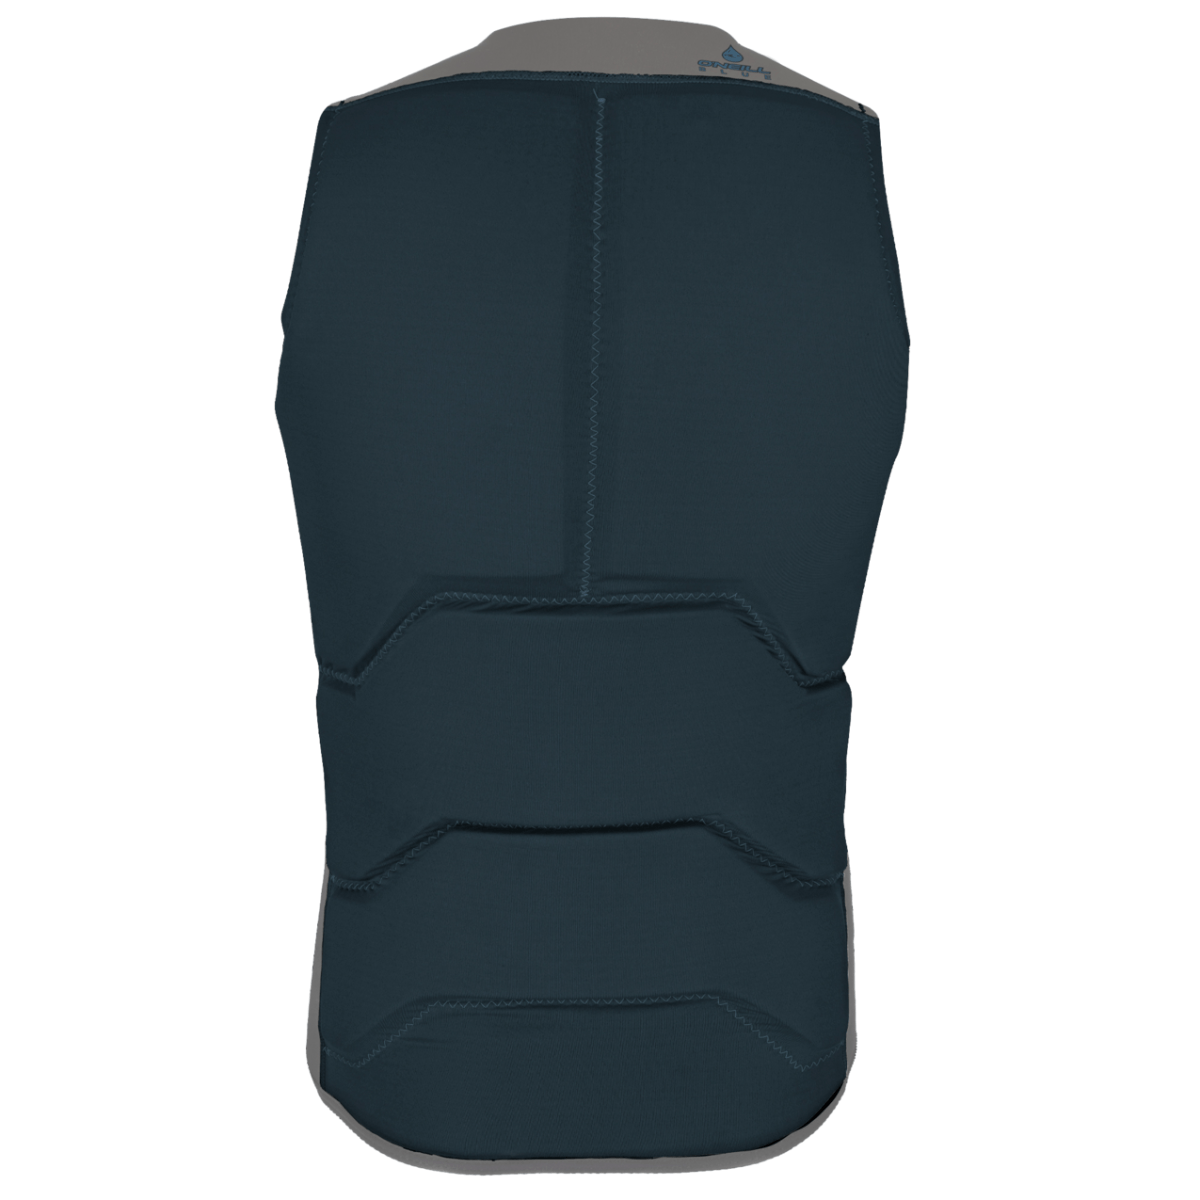 Oneill Nomad Front Zip Comp Vest in Cadet Blue and Gunmetal - BoardCo